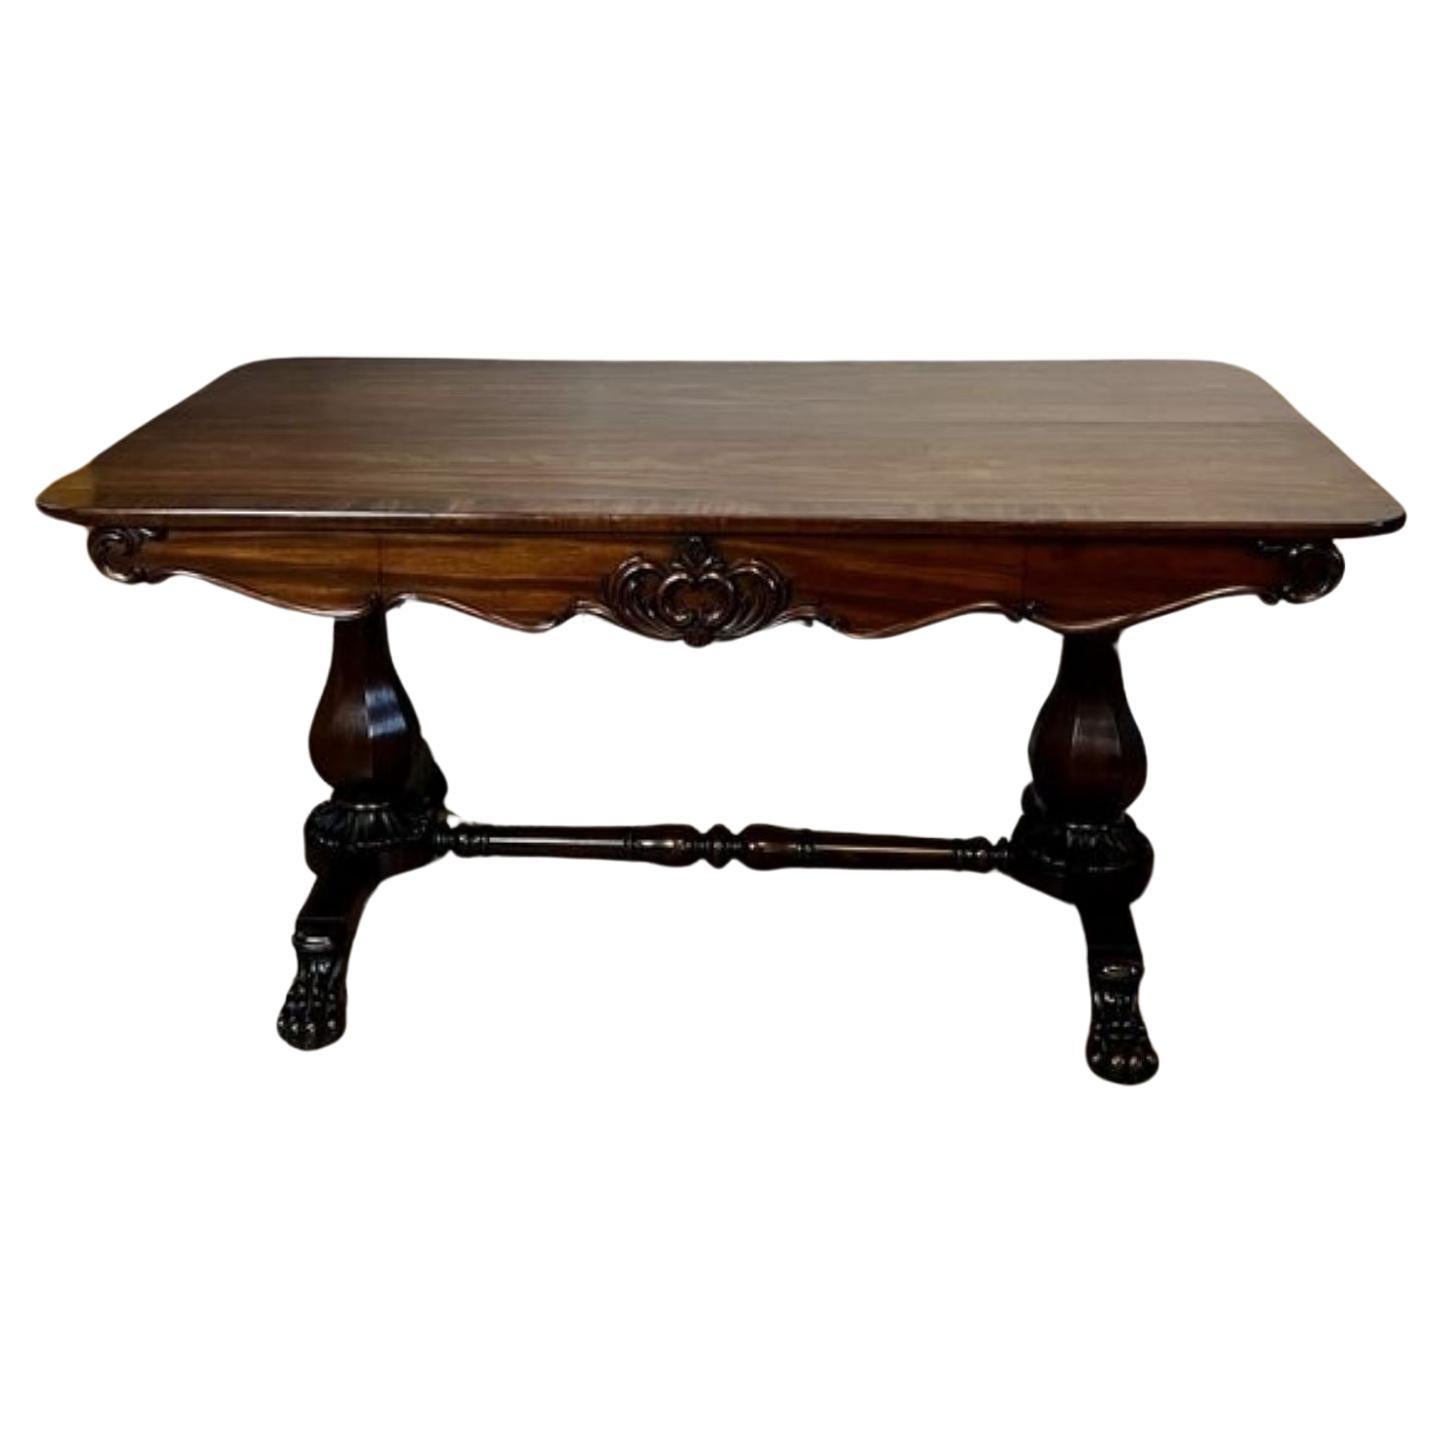 Superb quality antique William IV large freestanding library centre table 